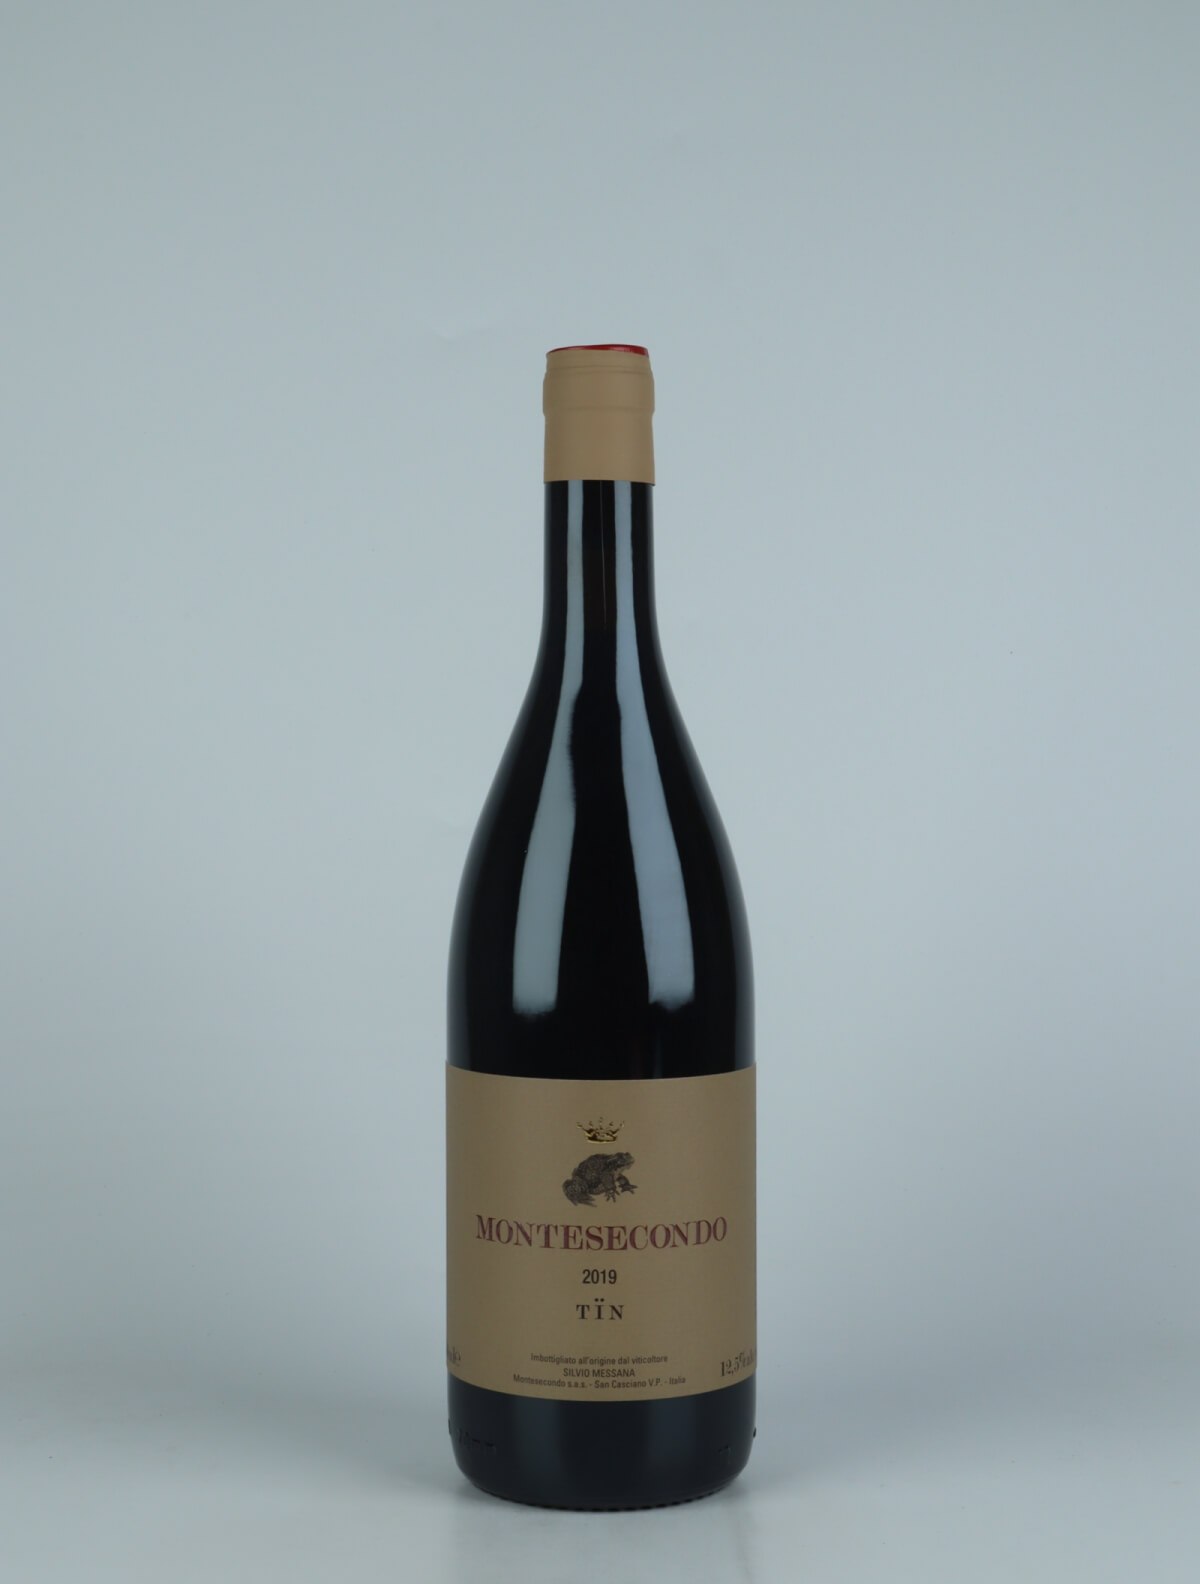 A bottle 2019 Tïn - Sangiovese Red wine from Montesecondo, Tuscany in Italy